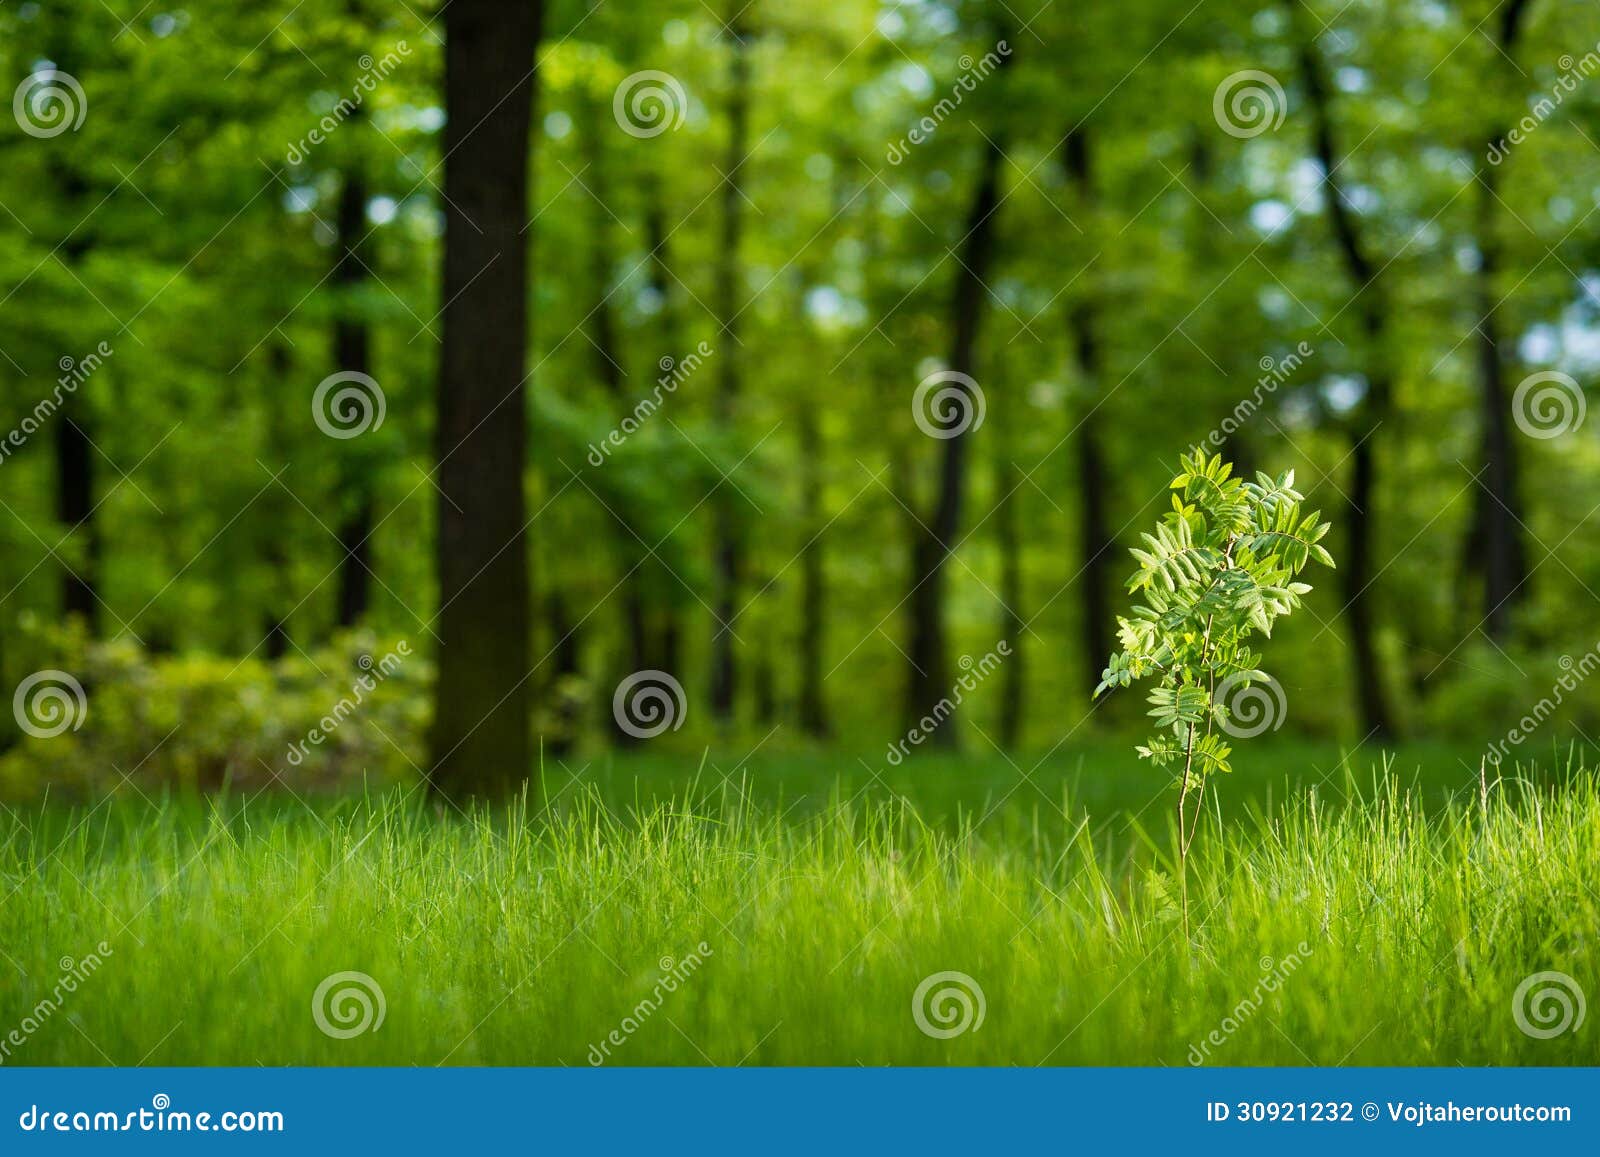 sunlit young rowan tree in the lush green forest